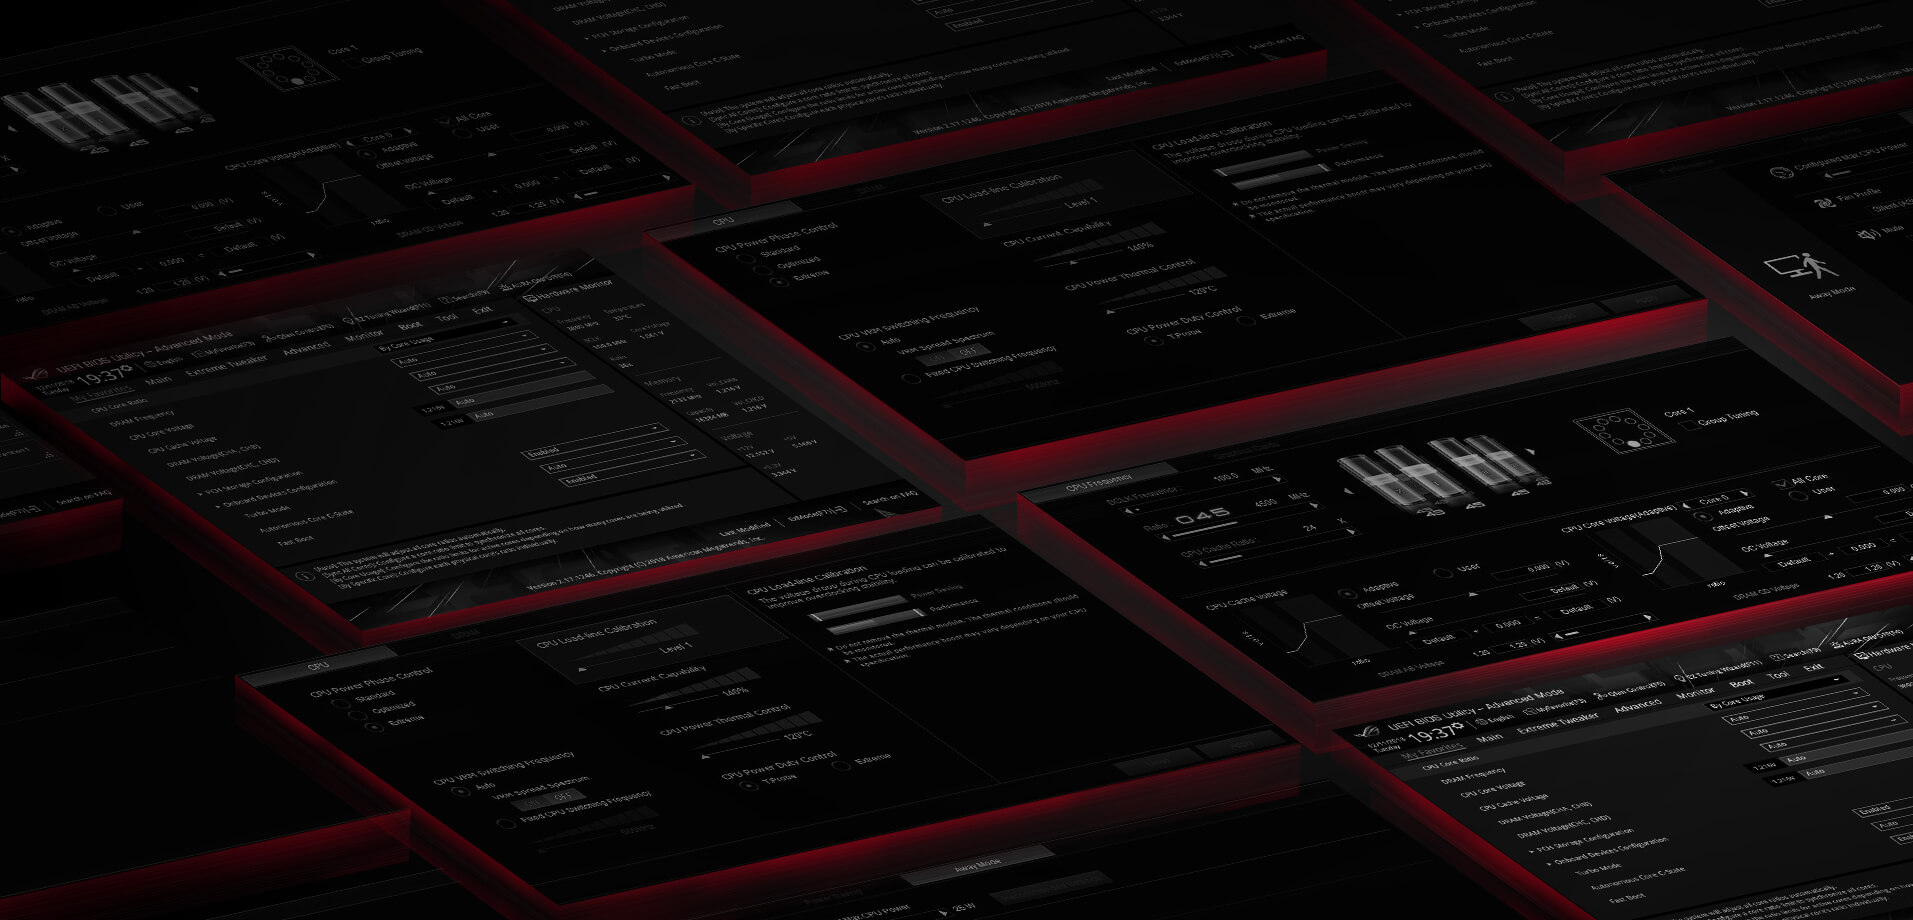 The software UI overview of ROG Maximus XIII Hero